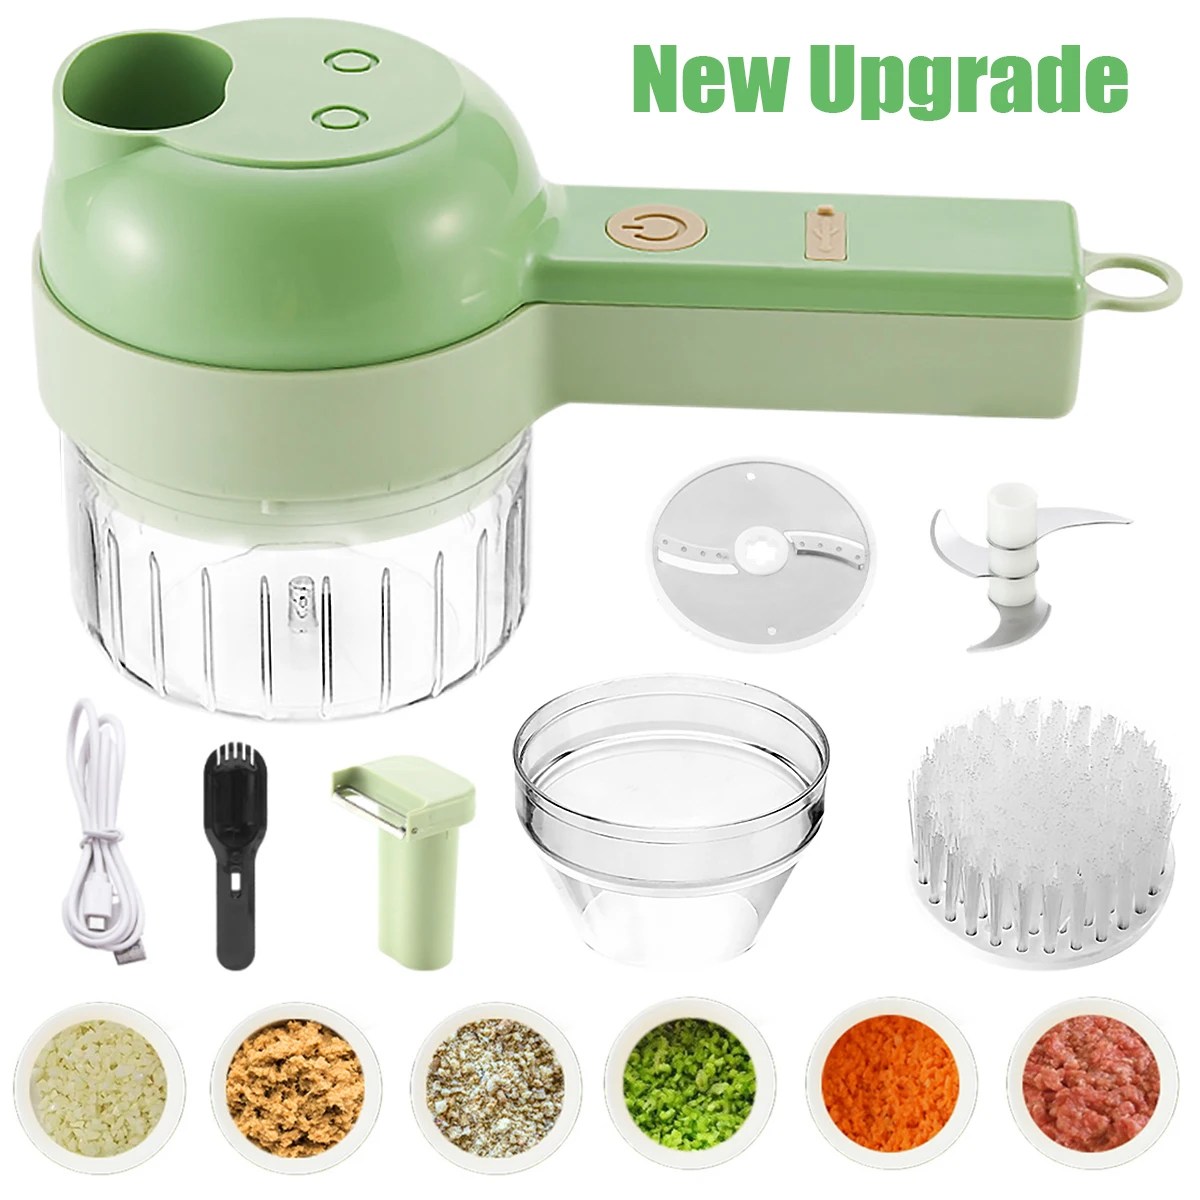 Manual Food Processor Vegetable Chopper 2.3 Cup Small Mini Hand Pull String  Onion Chopper Garlic Mincer Cutter with 3 Stainless Steel Blades - White